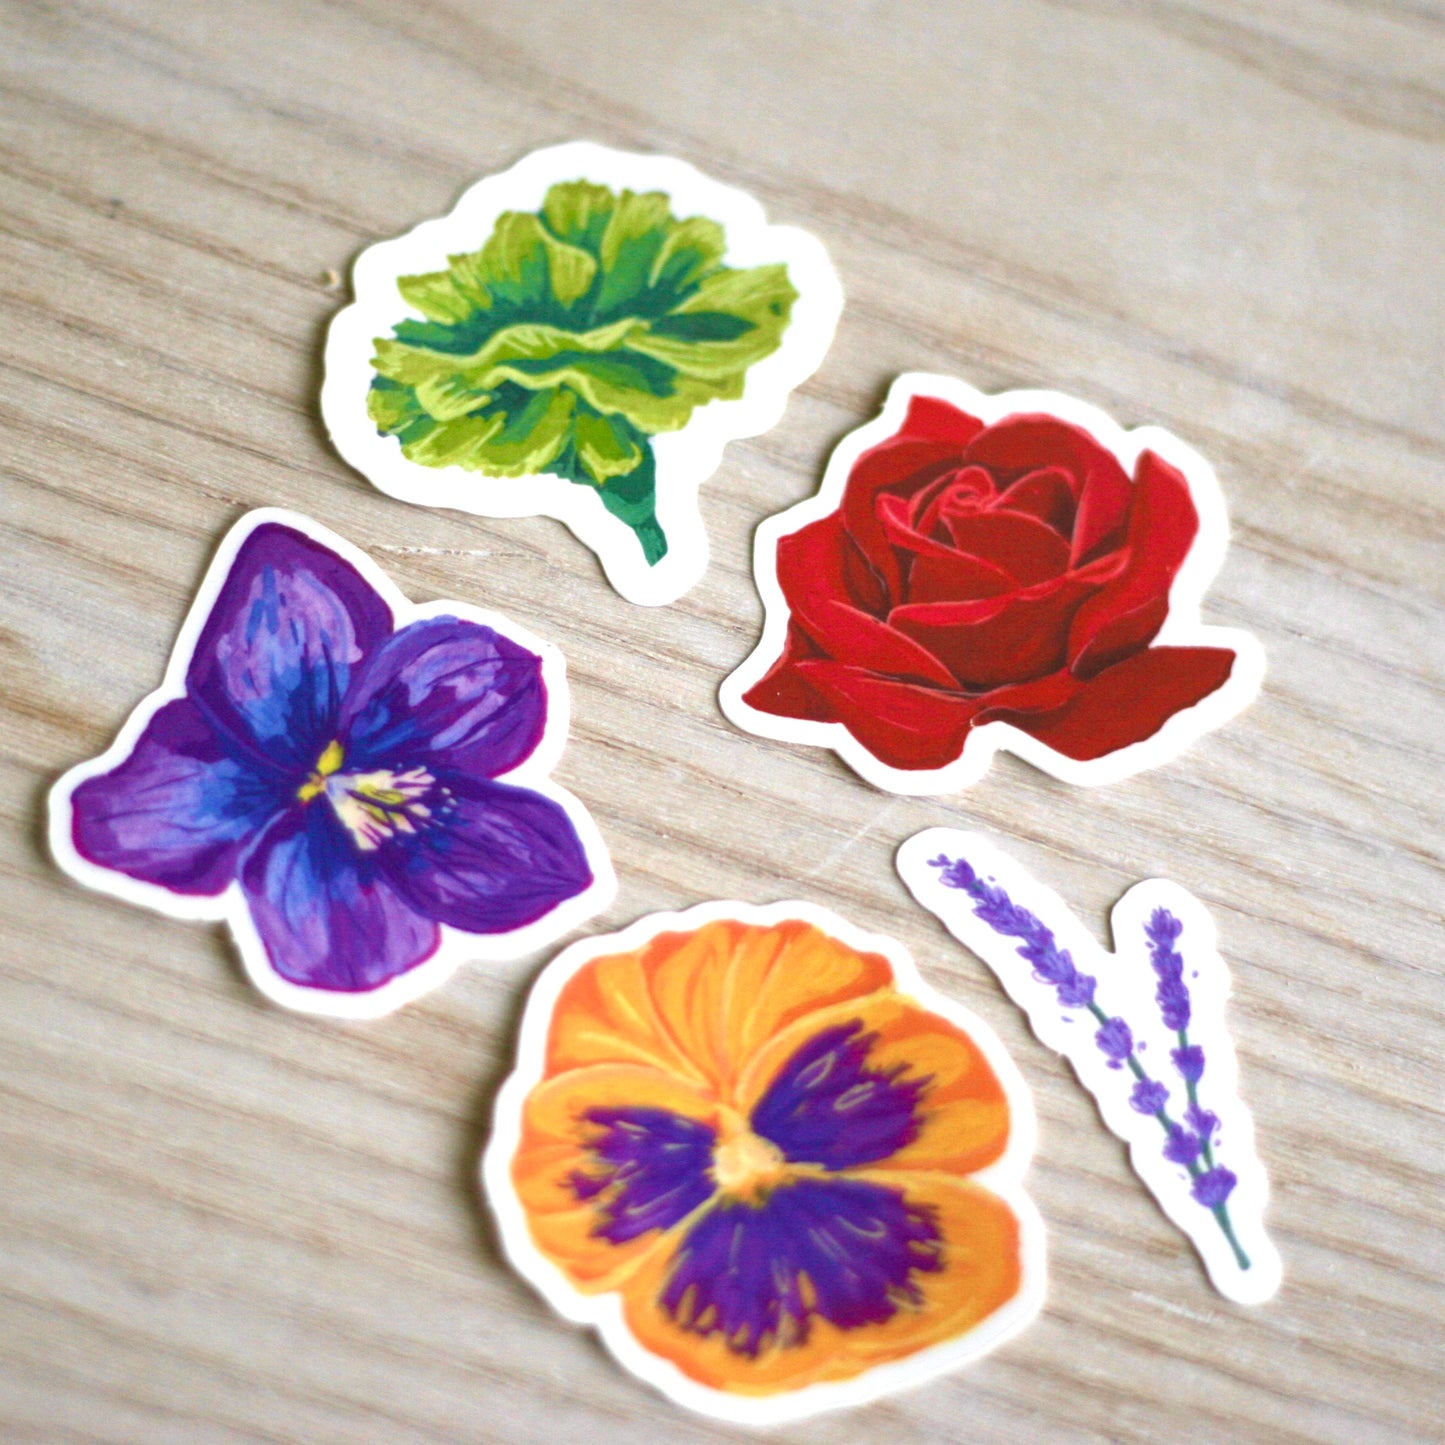 Queer Floral Sticker Pack